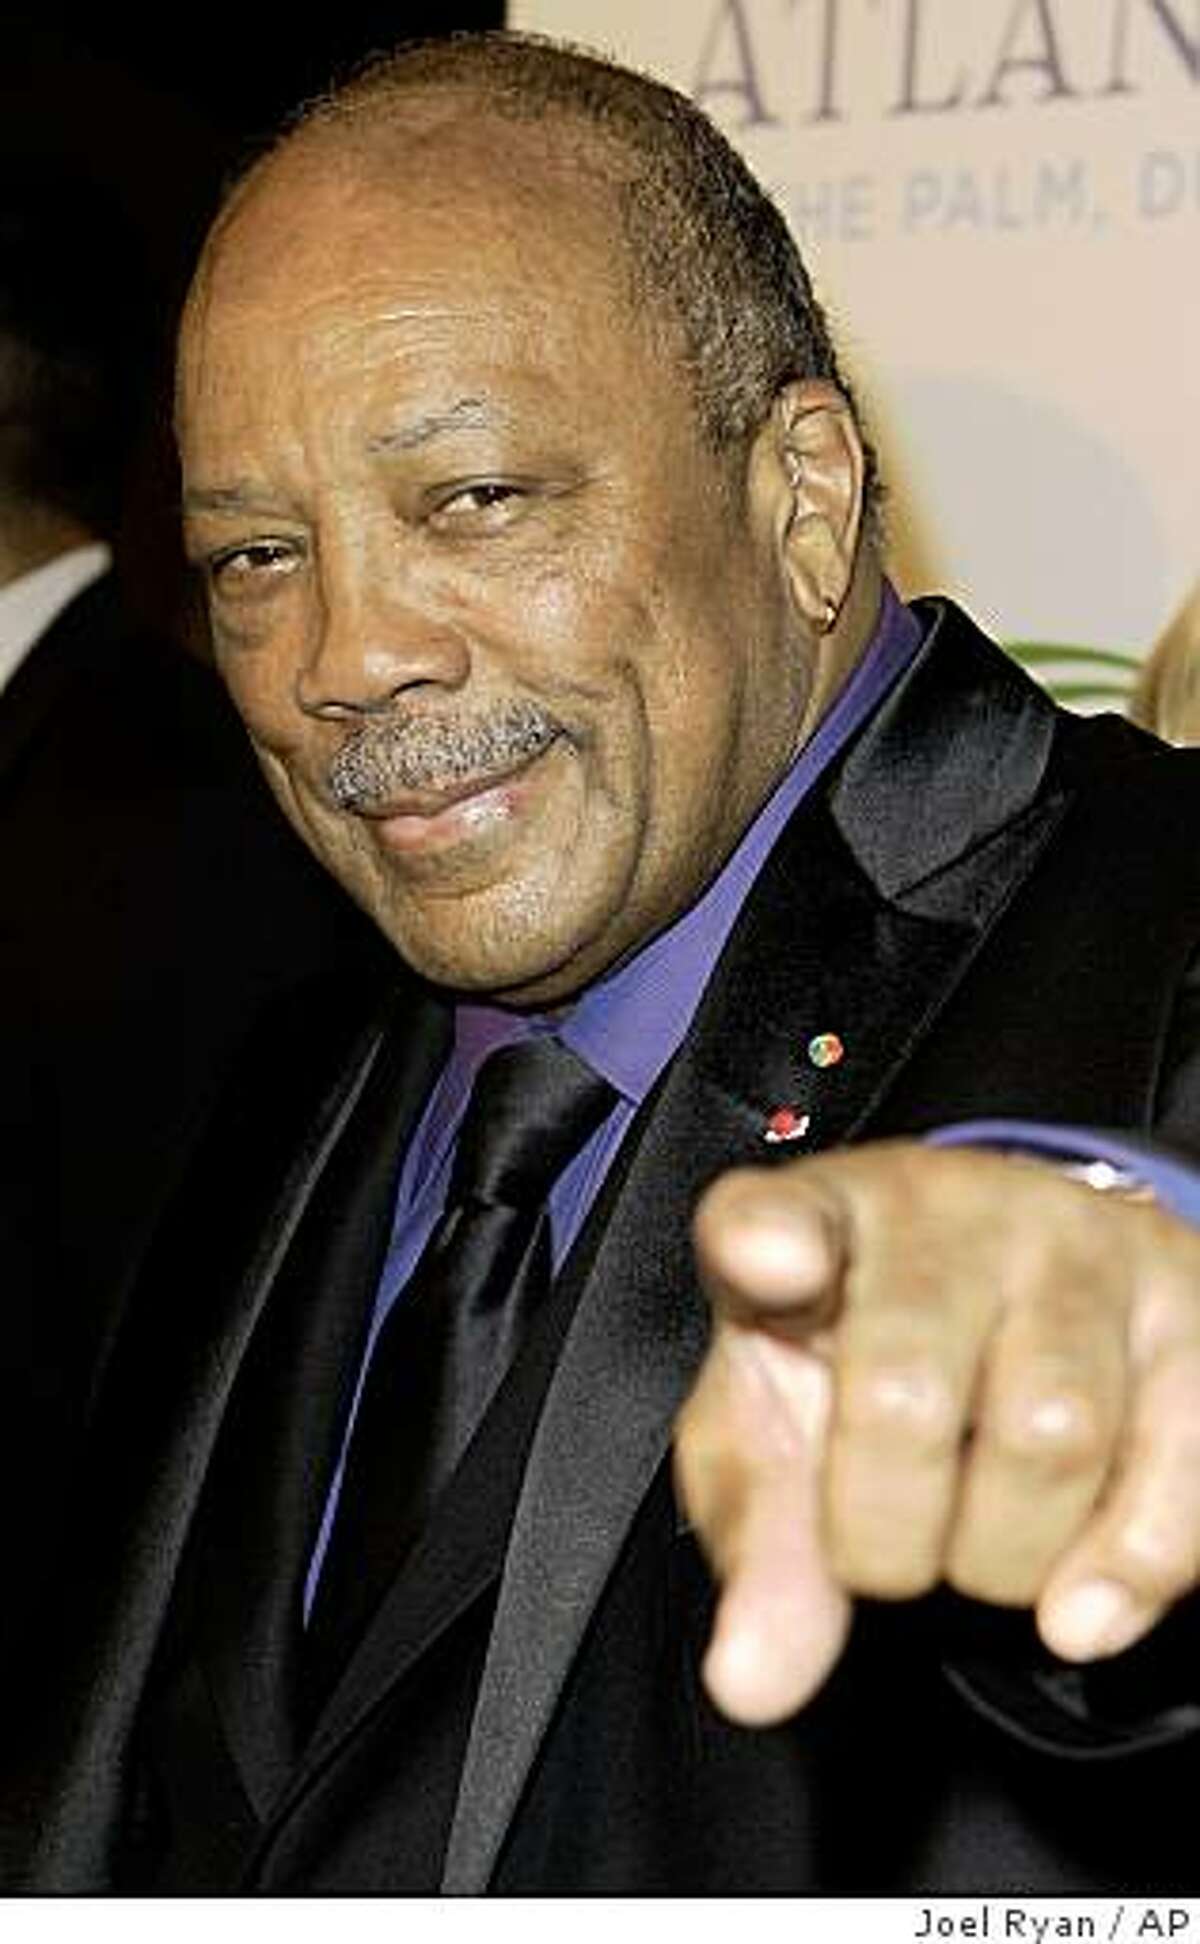 US music maker Quincy Jones arrives on the red carpet of the Atlantis, The Palm Hotel in Dubai launch party, which is the Middle East's biggest opening gala, Thursday, Nov. 20, 2008.